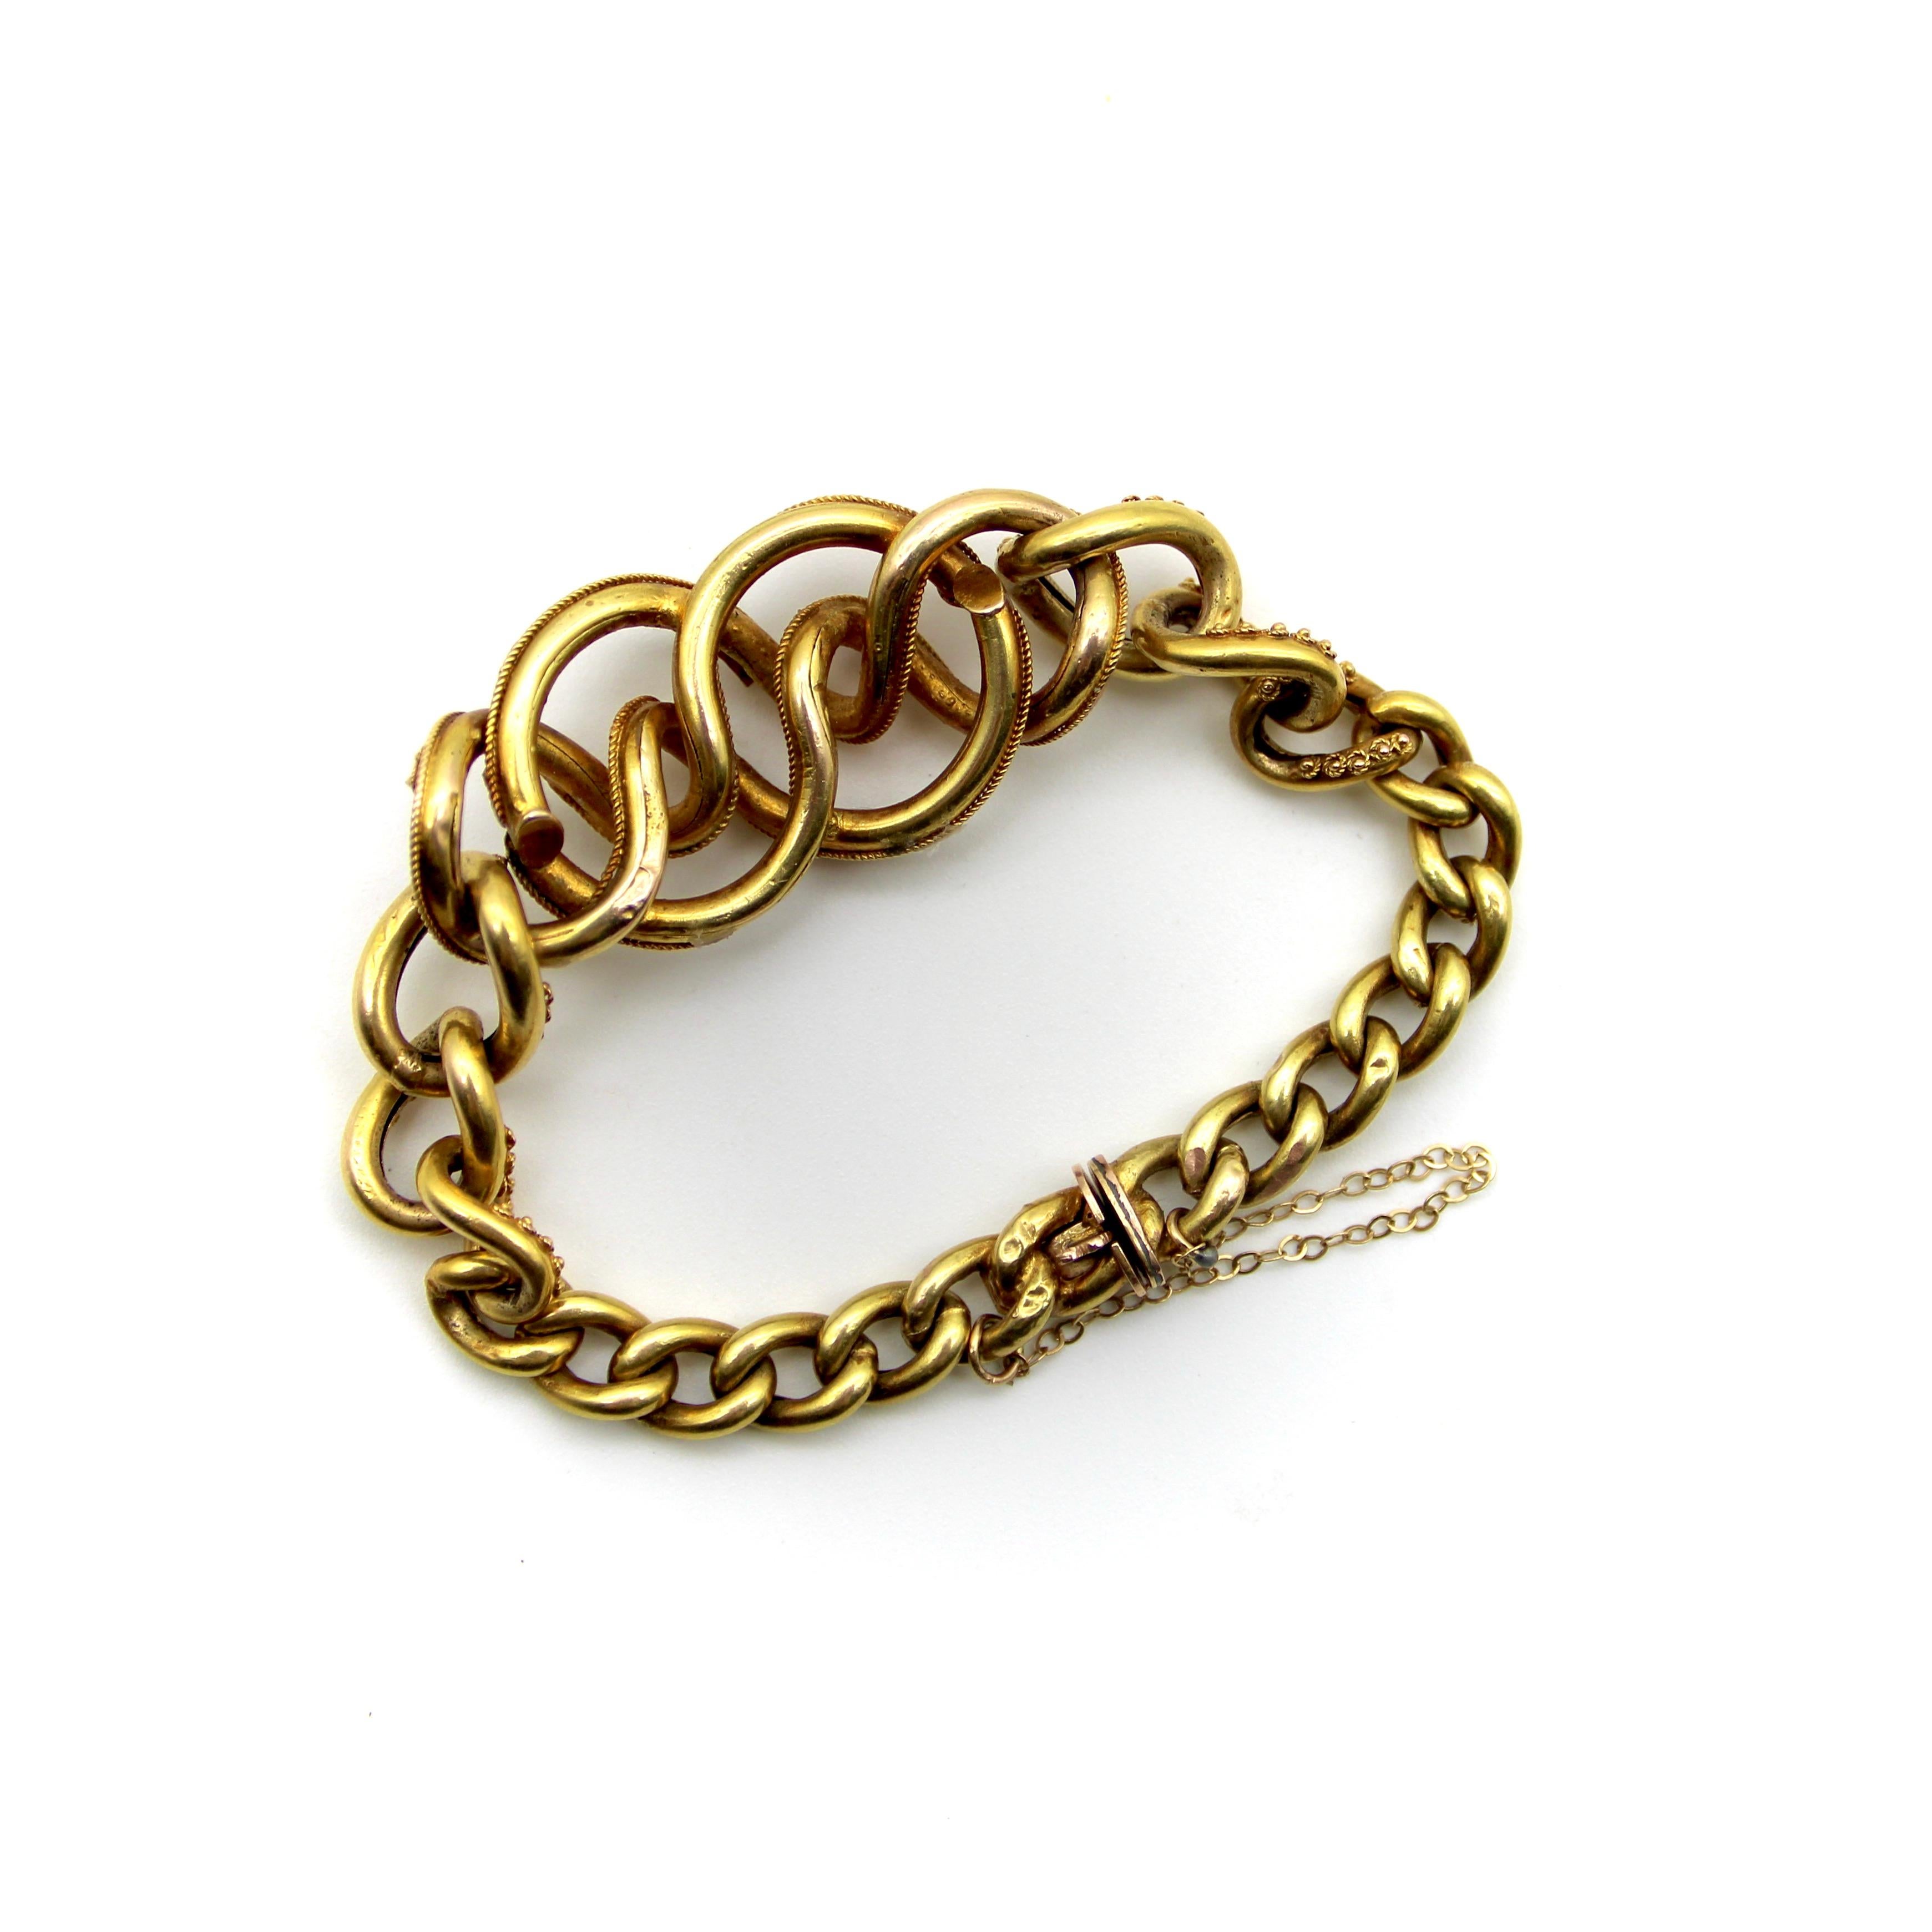 Circa 1880’s, this 14k gold Etruscan Revival bracelet has a lover’s knot motif adorned with pearls and garnets. The central part of the bracelet consists of matching graduating curb links that extend from the main section into smaller, tighter curb